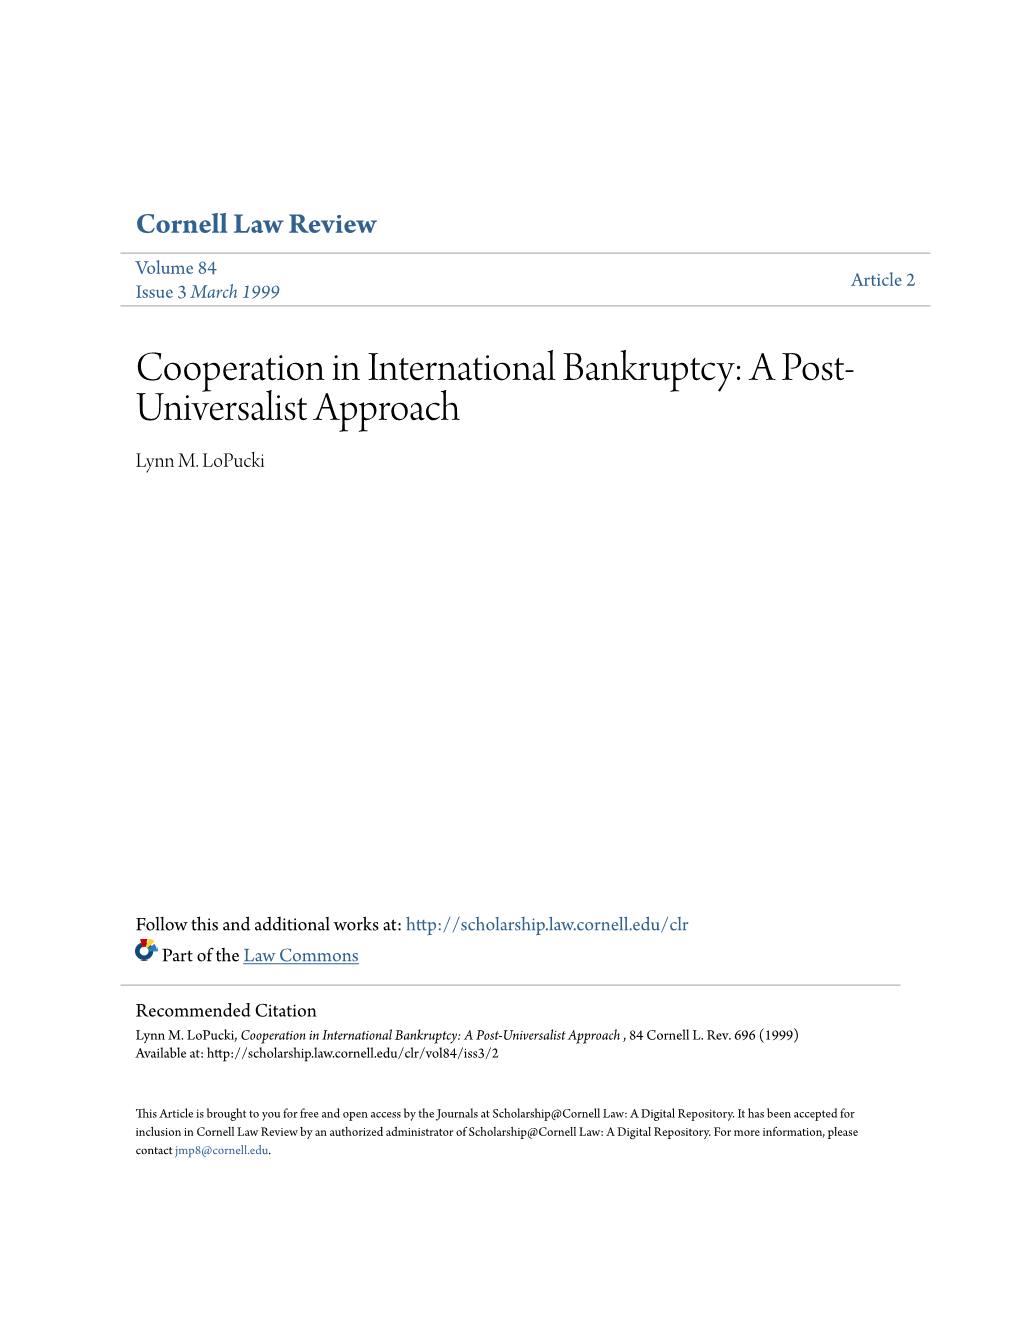 Cooperation in International Bankruptcy: a Post-Universalist Approach , 84 Cornell L